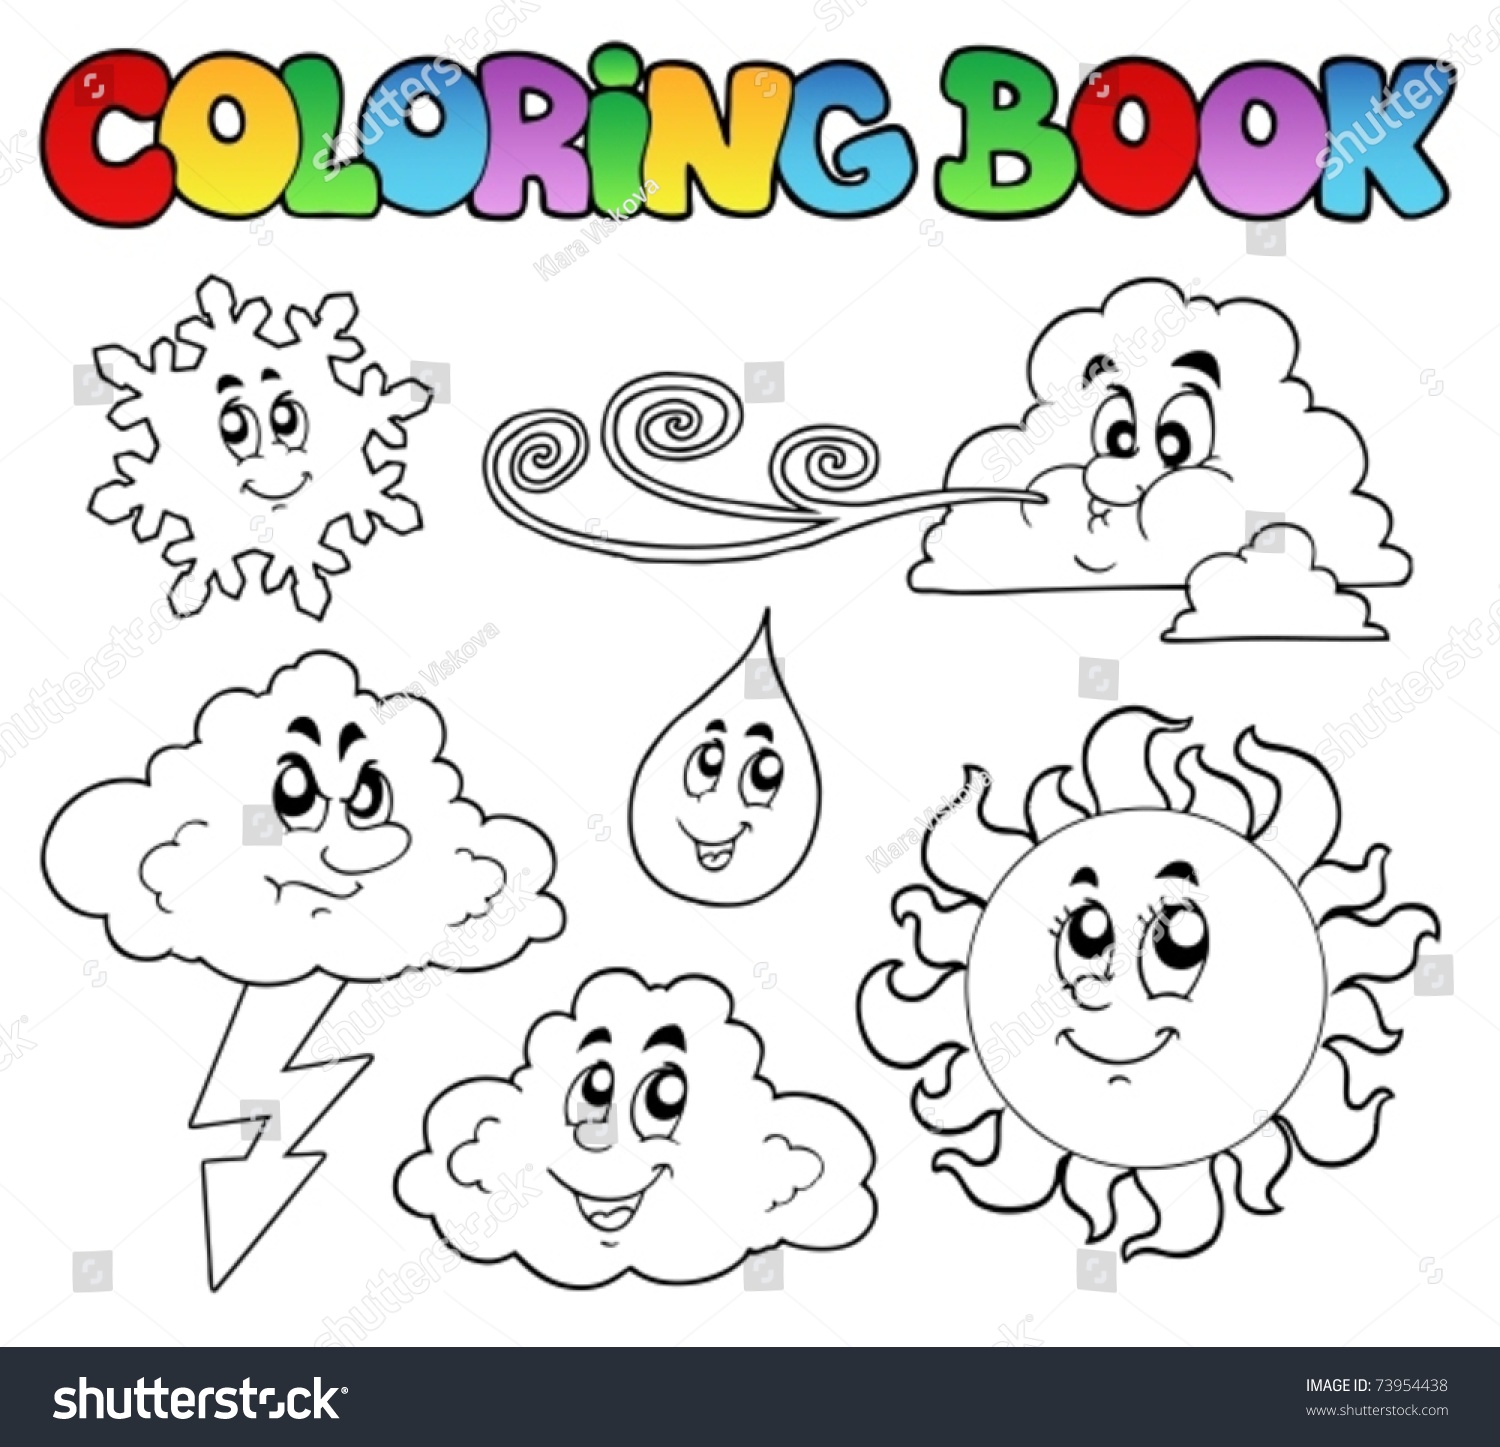 Coloring Book Weather Images Vector Illustration Stock Vector 73954438